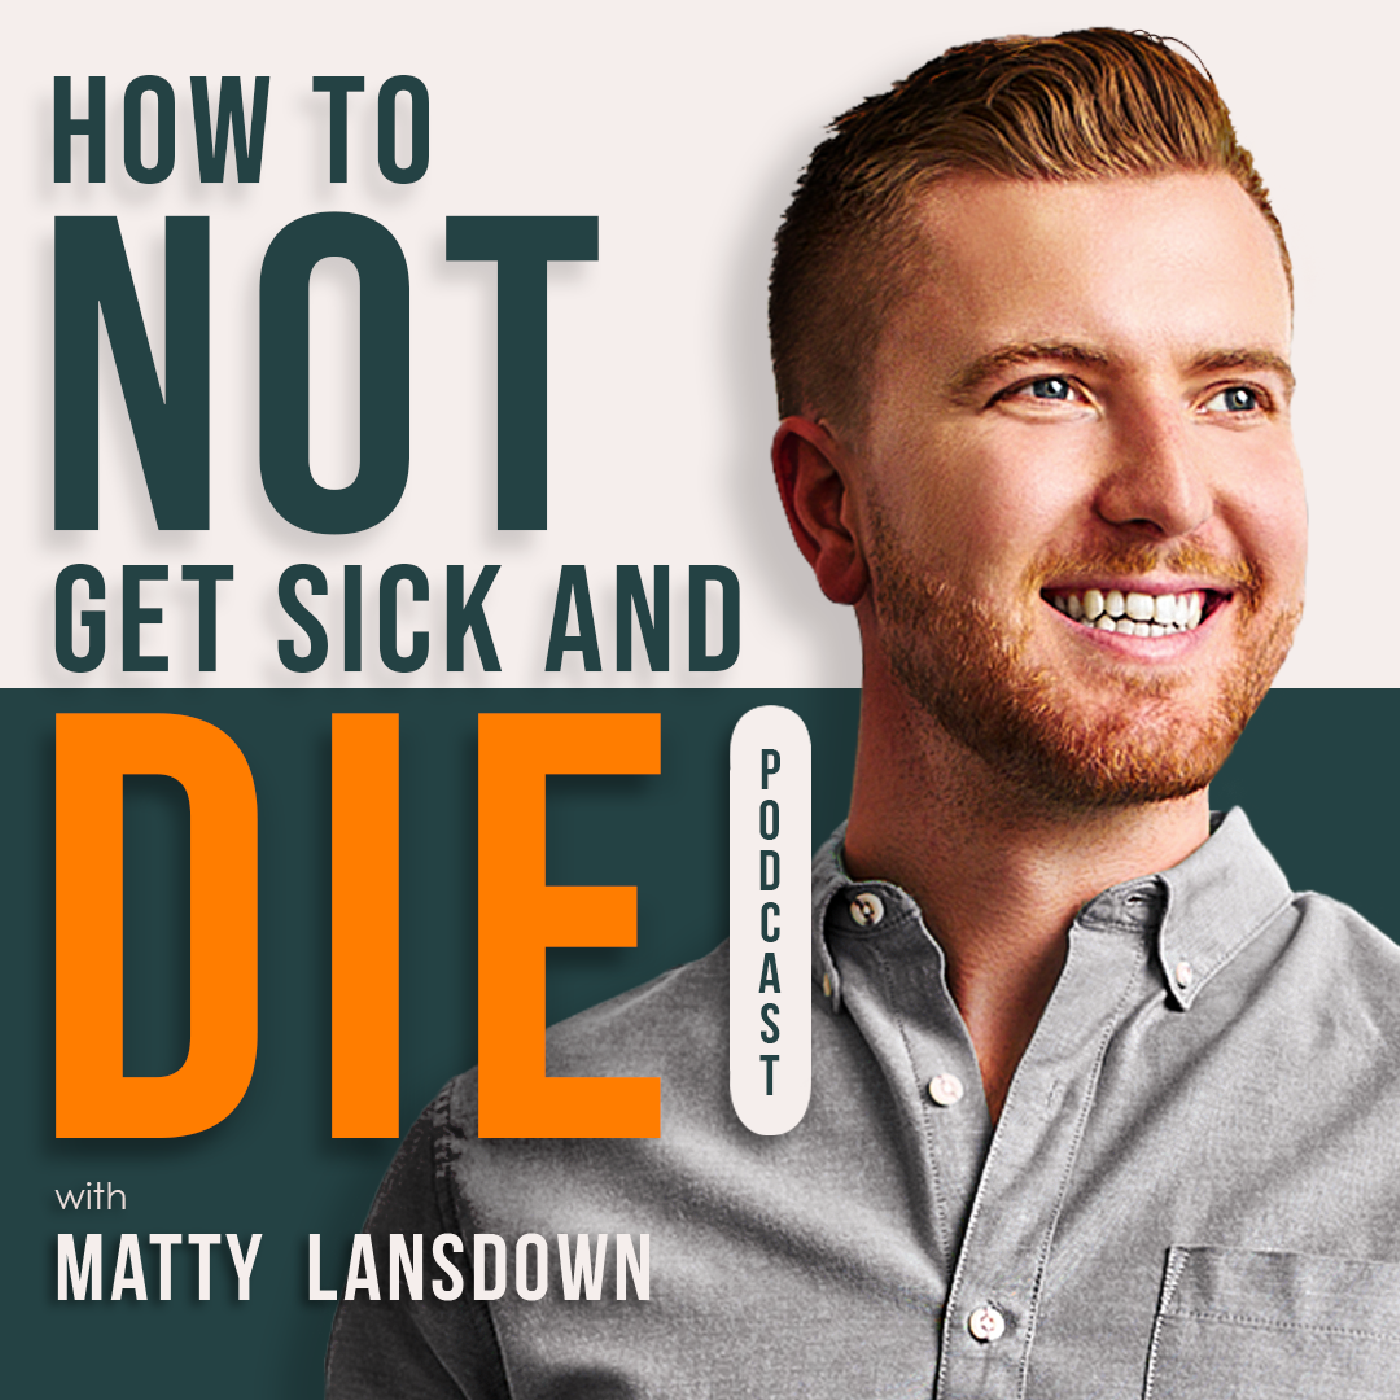 How To Not Get Sick And Die